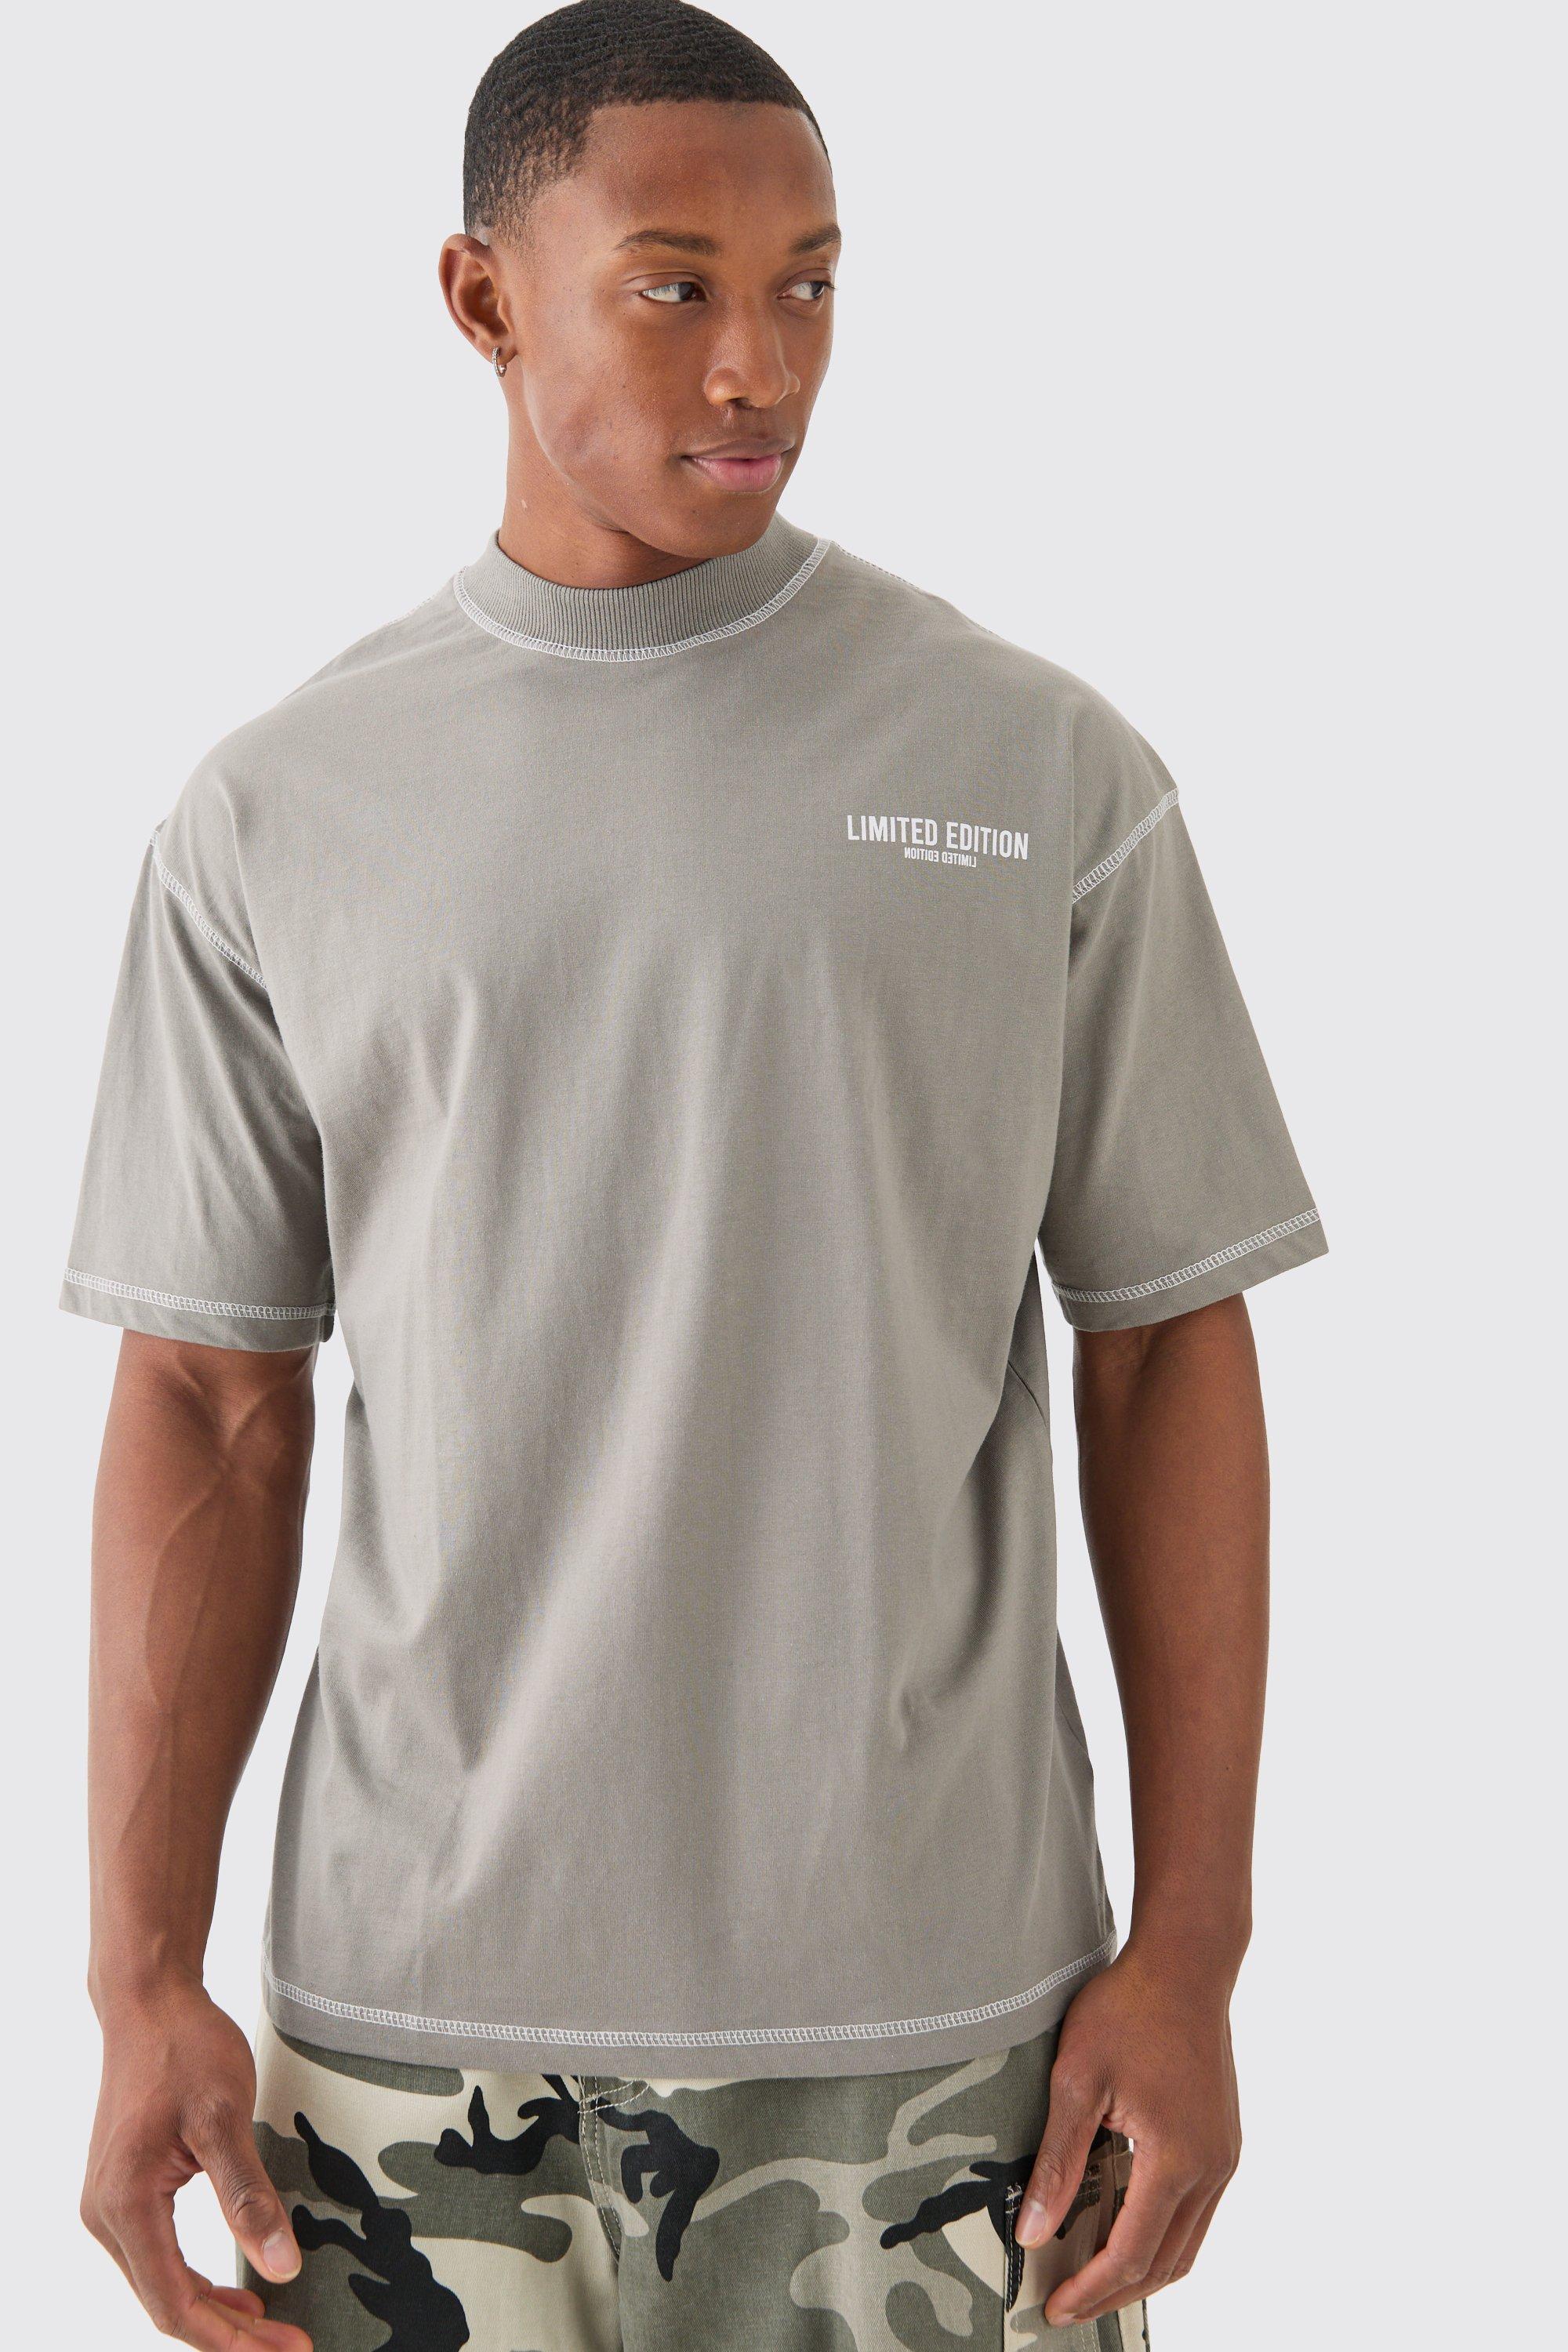 Image of Oversized Limited Edition Contrast Stitch T-shirt, Grigio